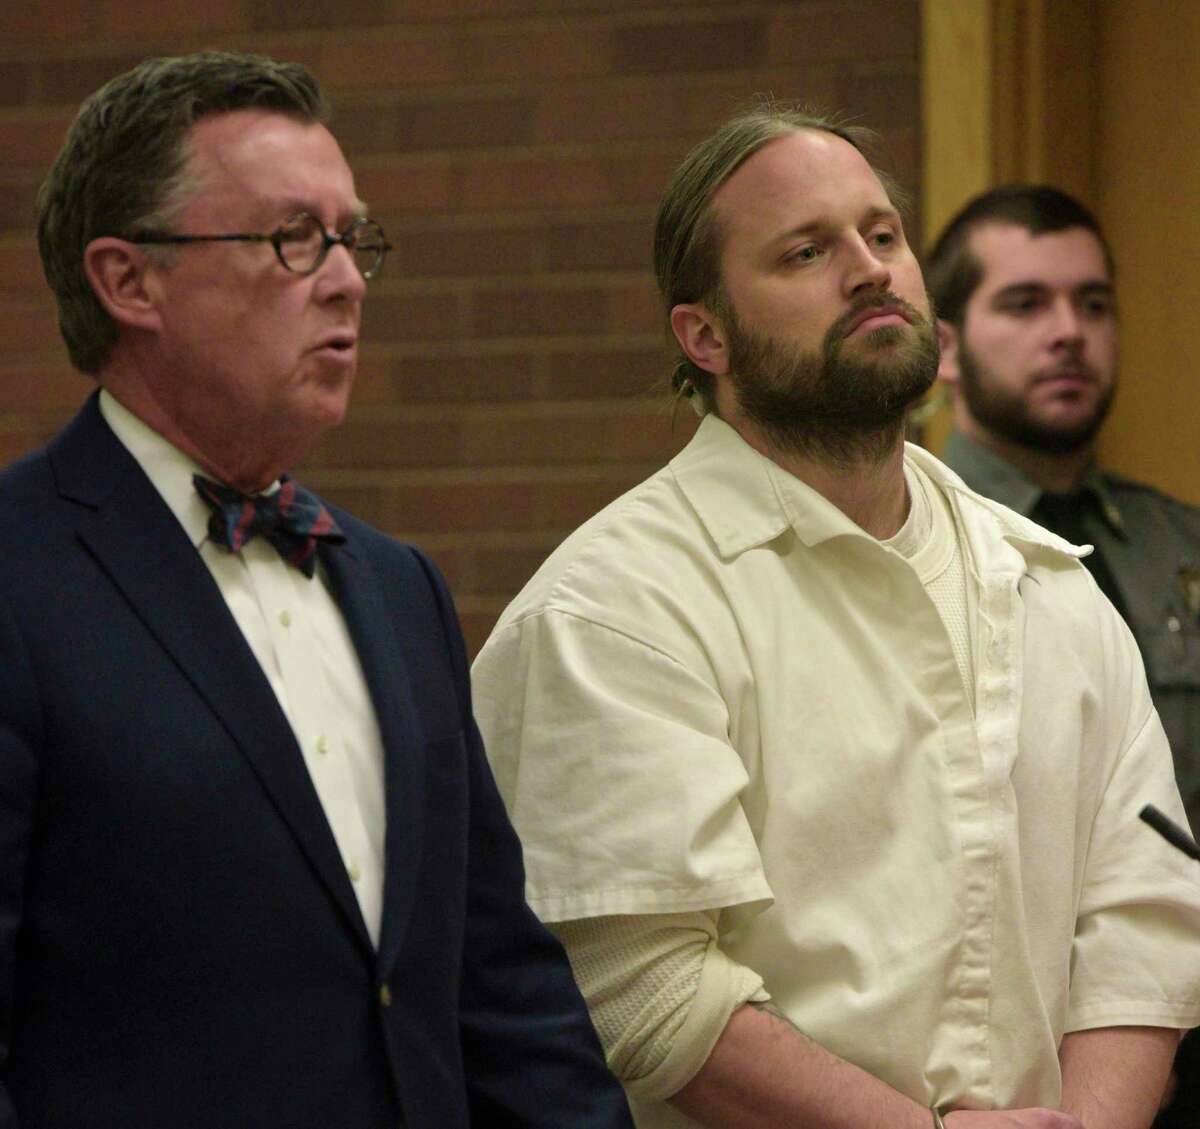 Aaron Bouffard appears in Superior Court in Danbury, Conn, on Friday, January 10, 2020.